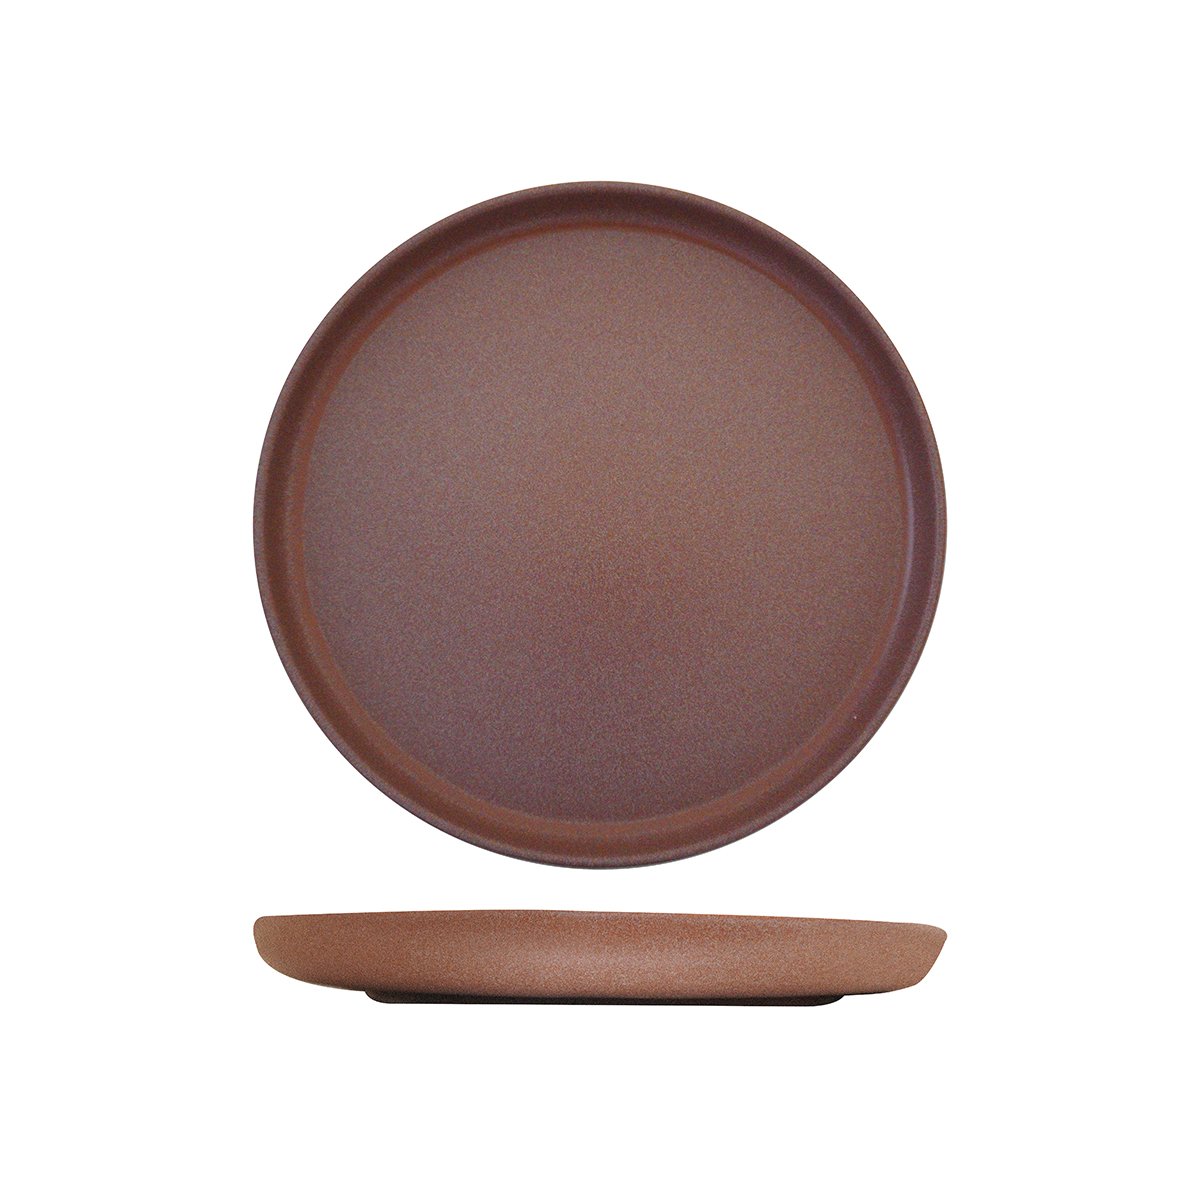 Round Plate - 280mm, Brown, Eclipse: Pack of 4